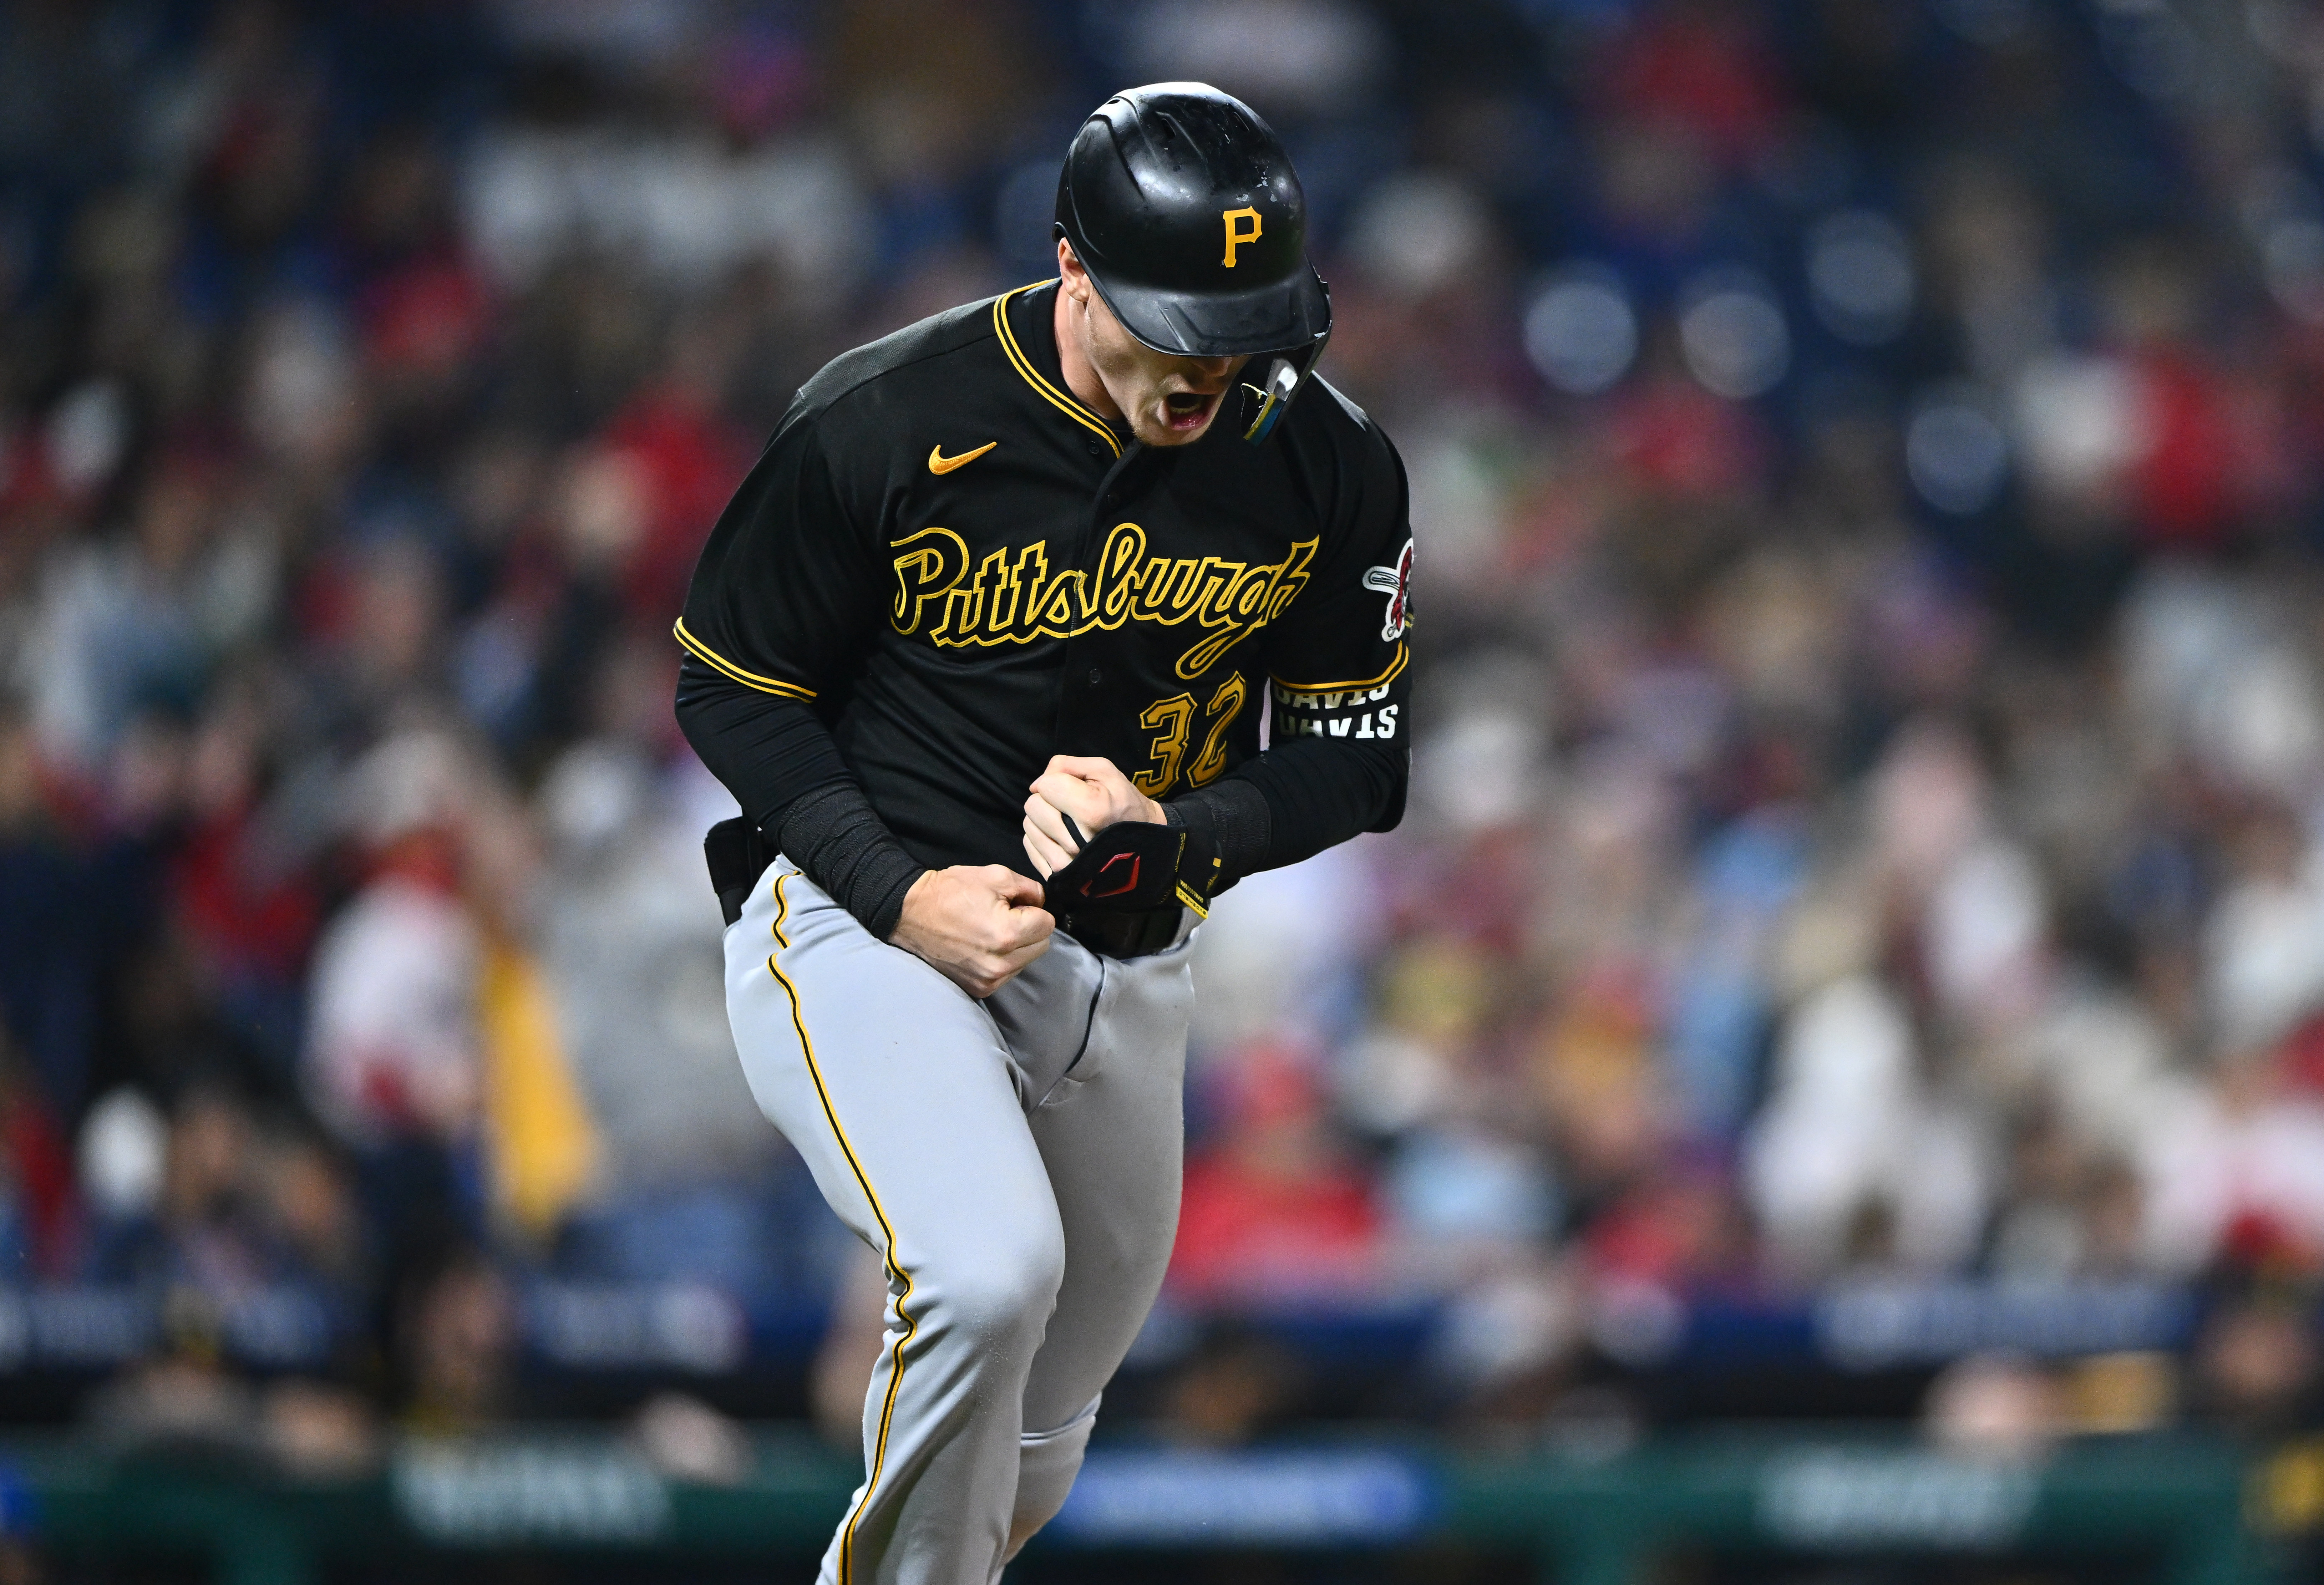 Phillies looking to punch playoff ticket as Pirates visit